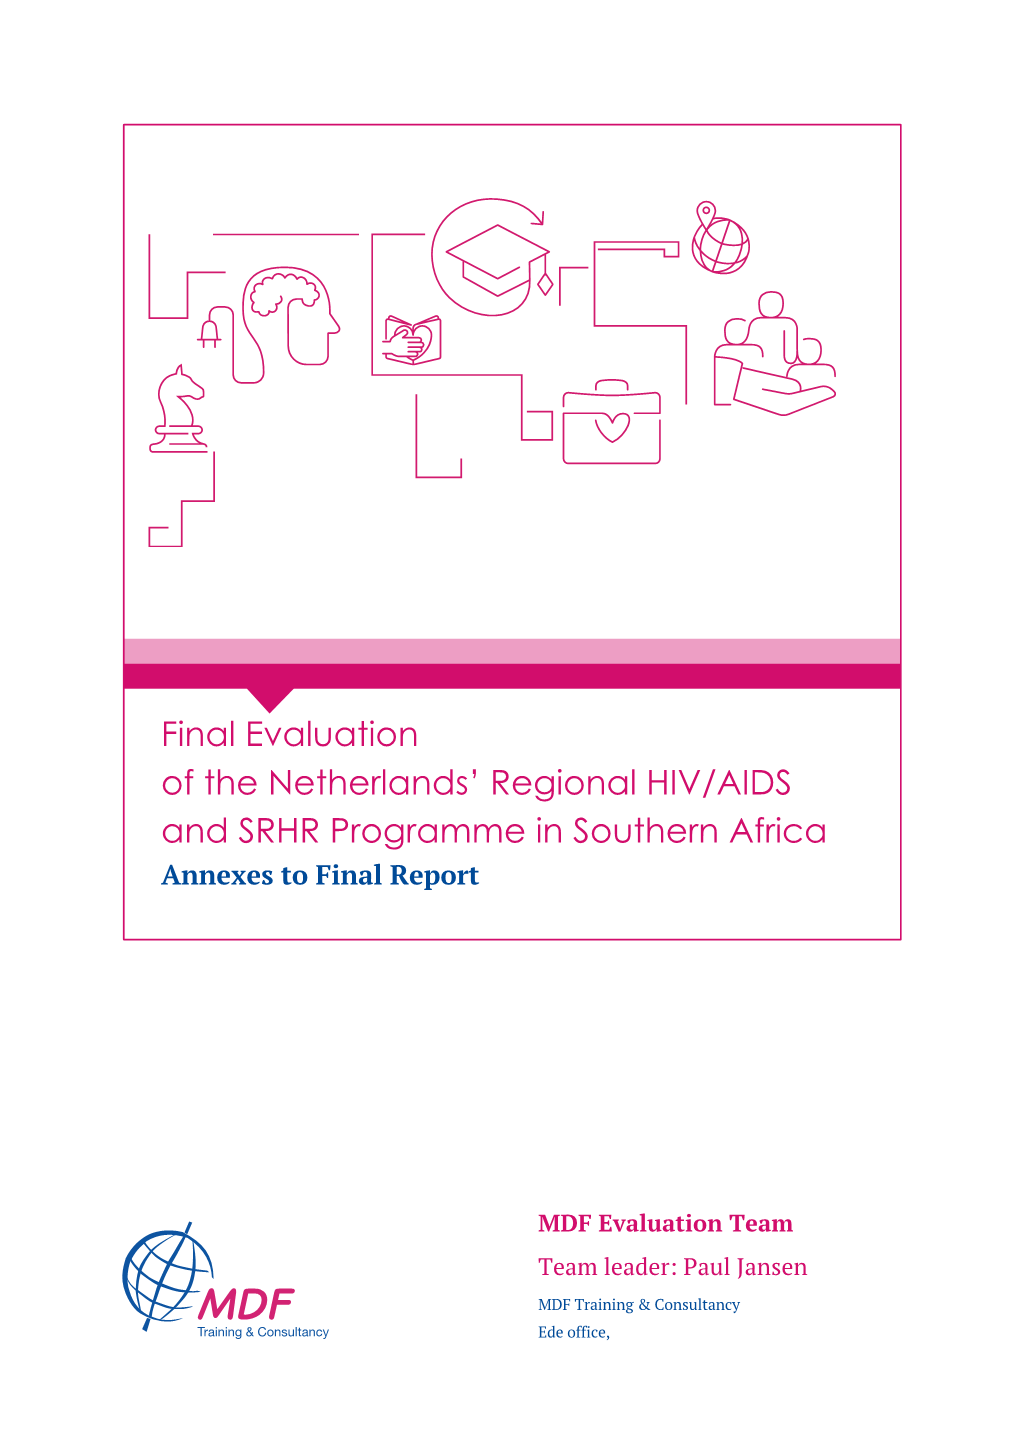 Final Evaluation of the Netherlands' Regional HIV/AIDS and SRHR